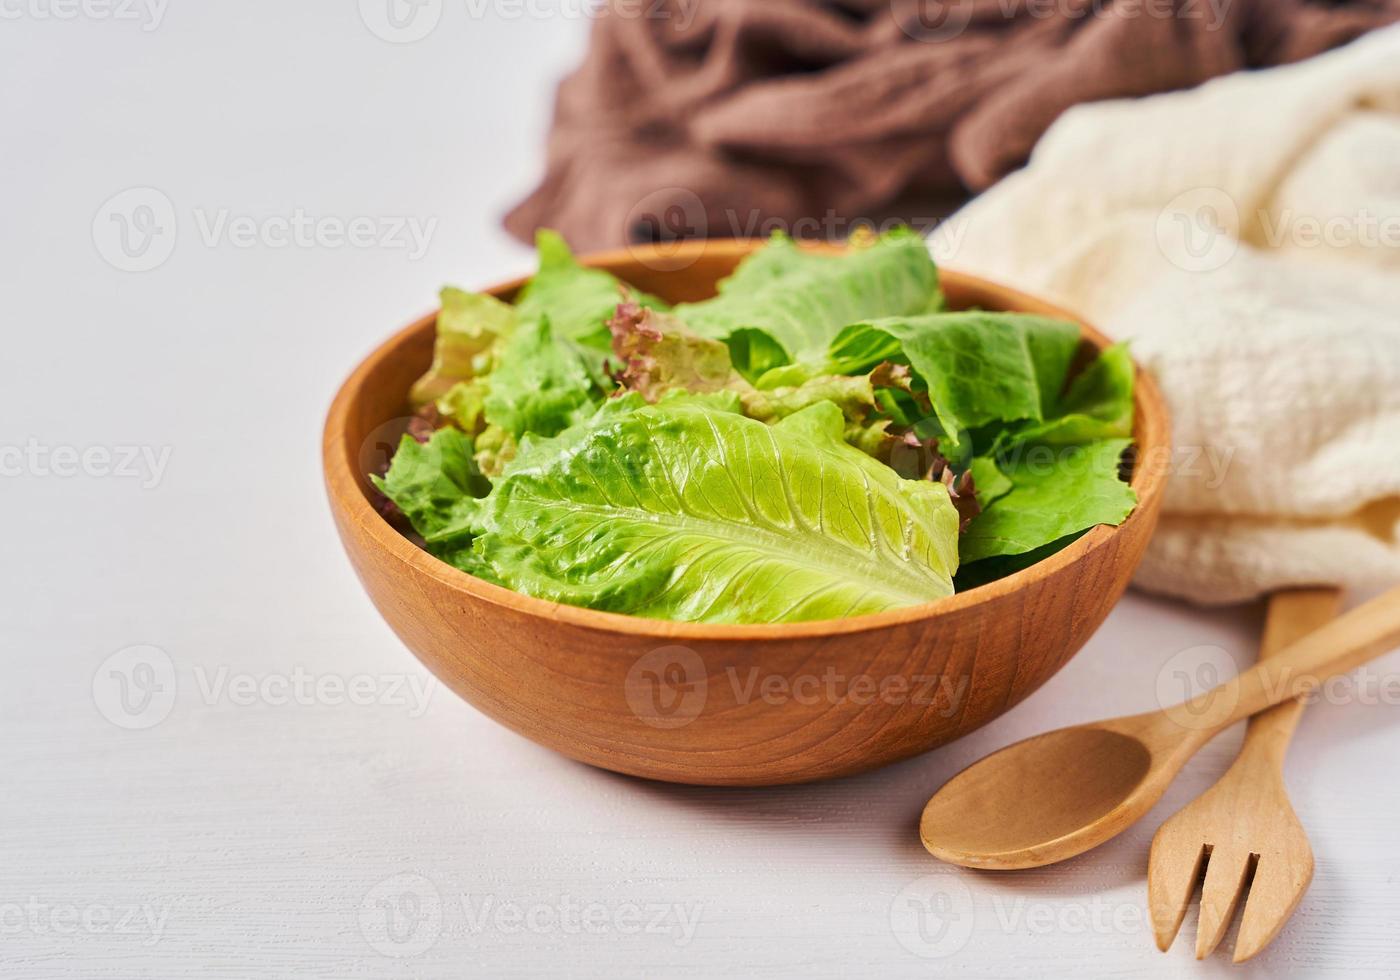 fresh salad from green leaves in a wooden bowl on white clean mood background with copy space. spoon and fork photo